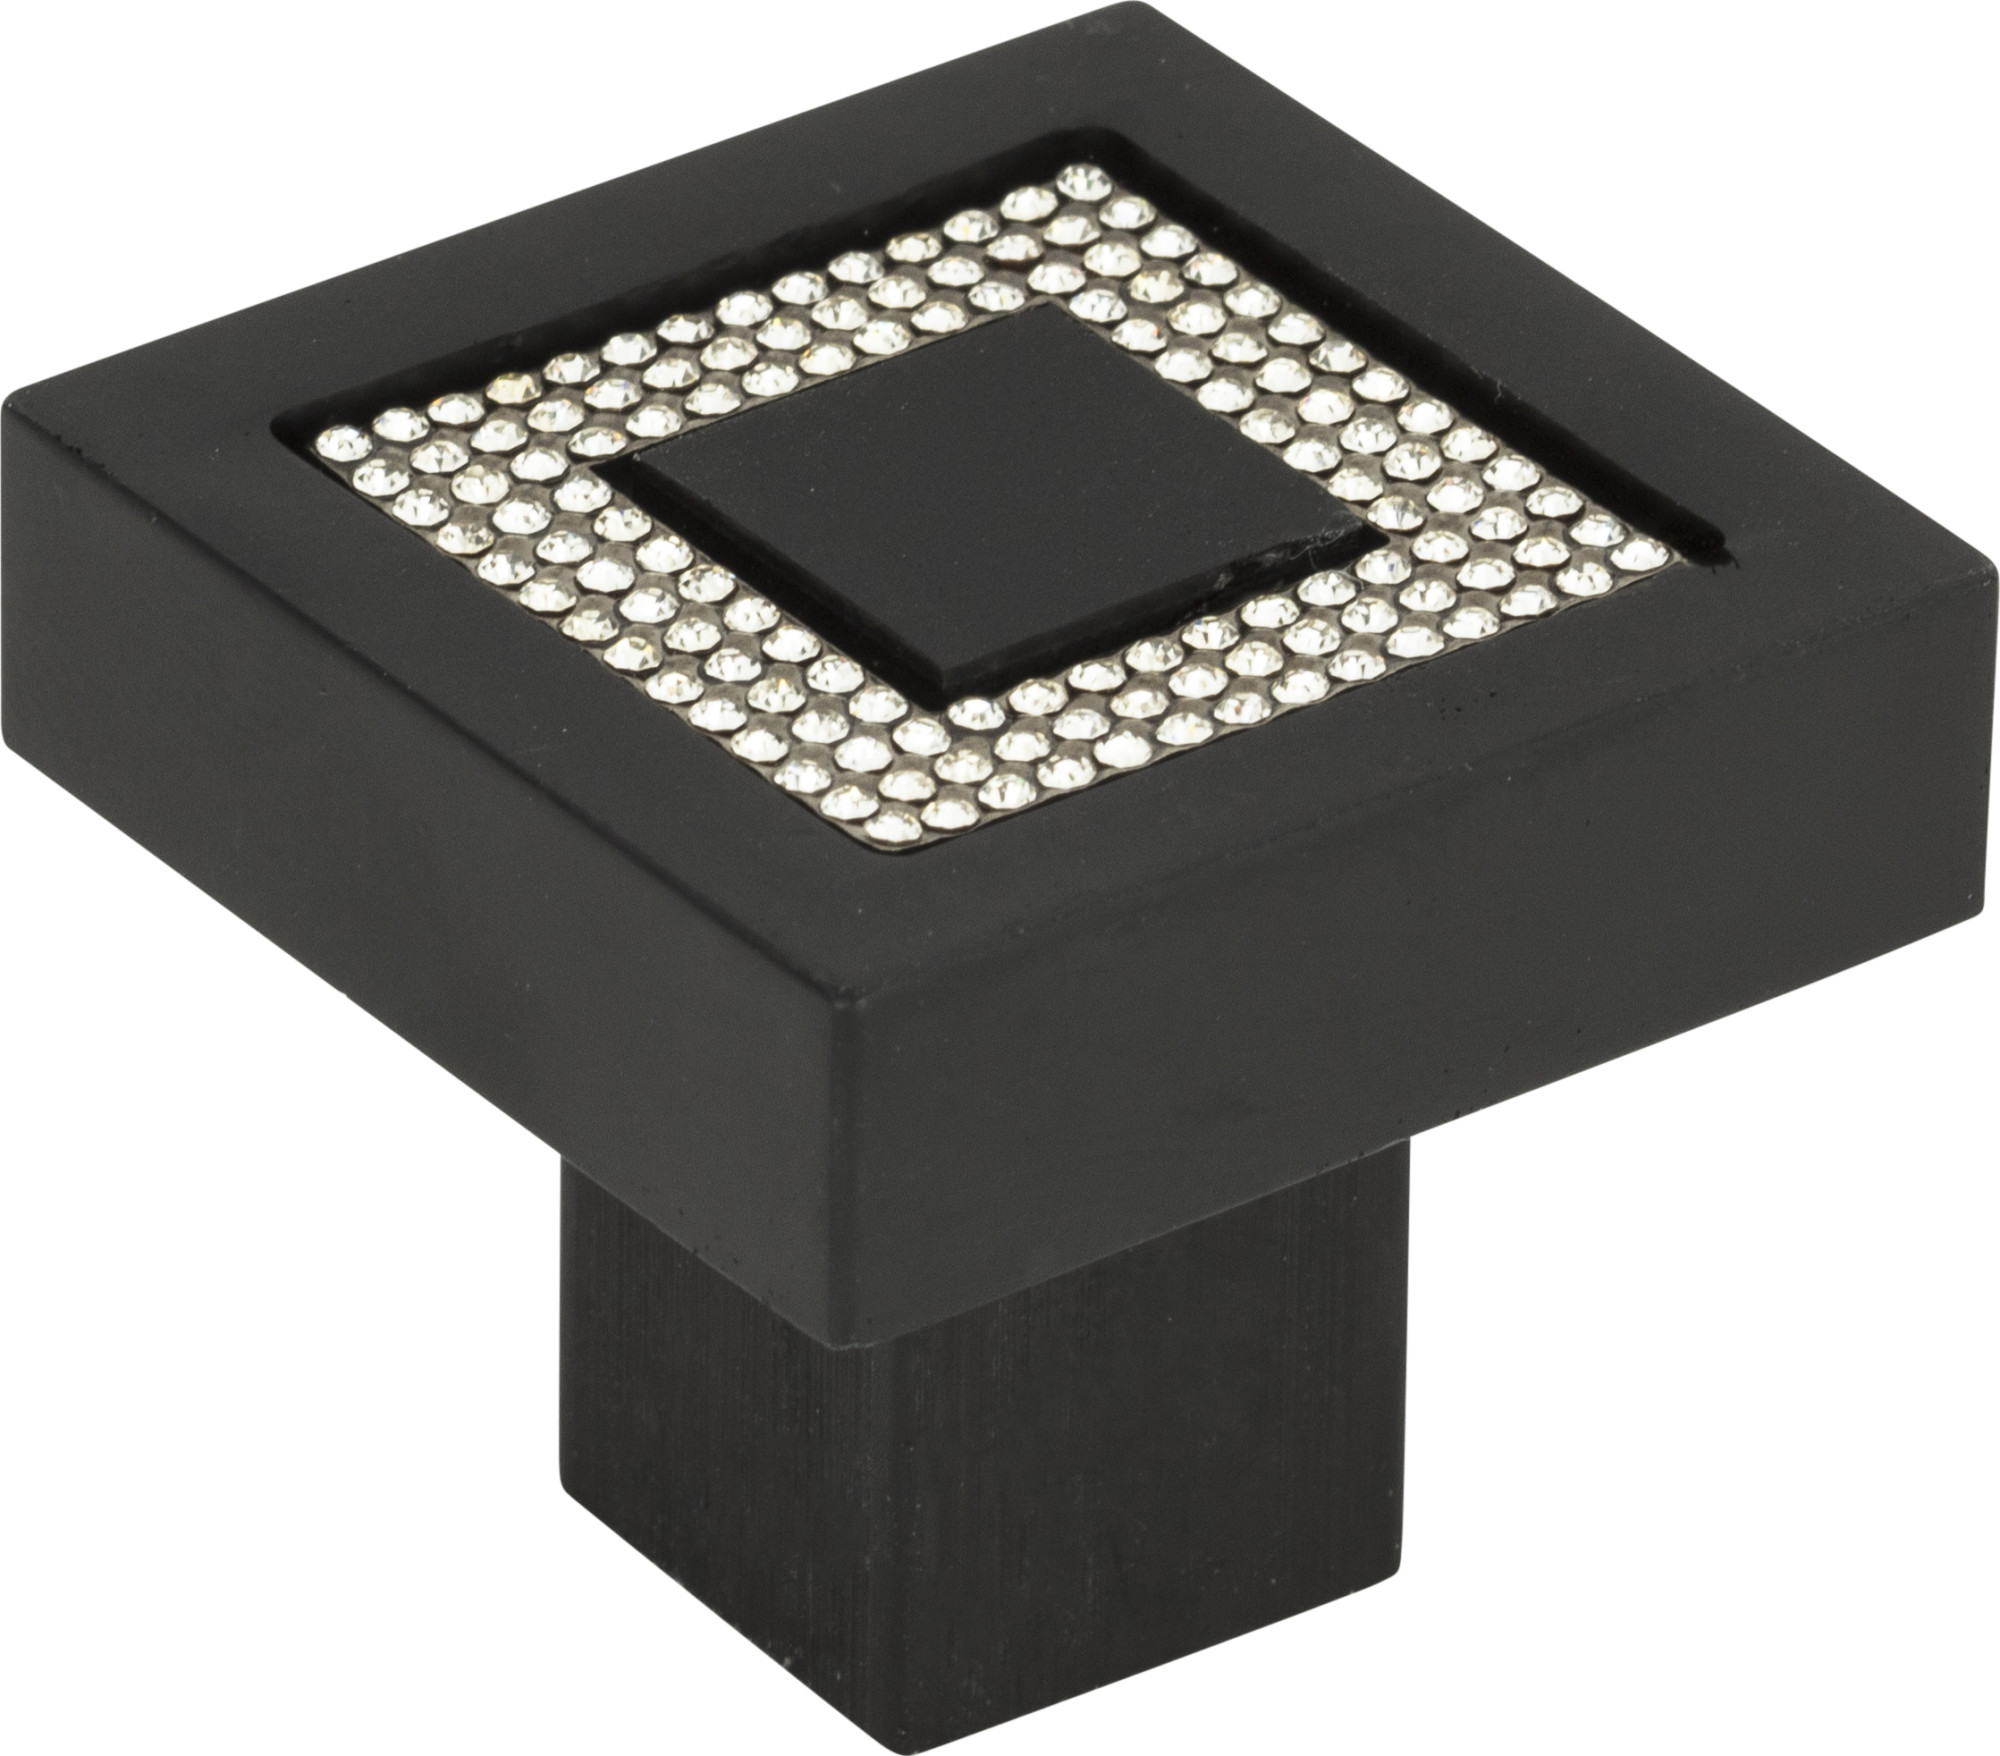 Crystal Pave 1.4 in. Square Knob - 3192-MC (Matte Chrome) - image 3 of 5